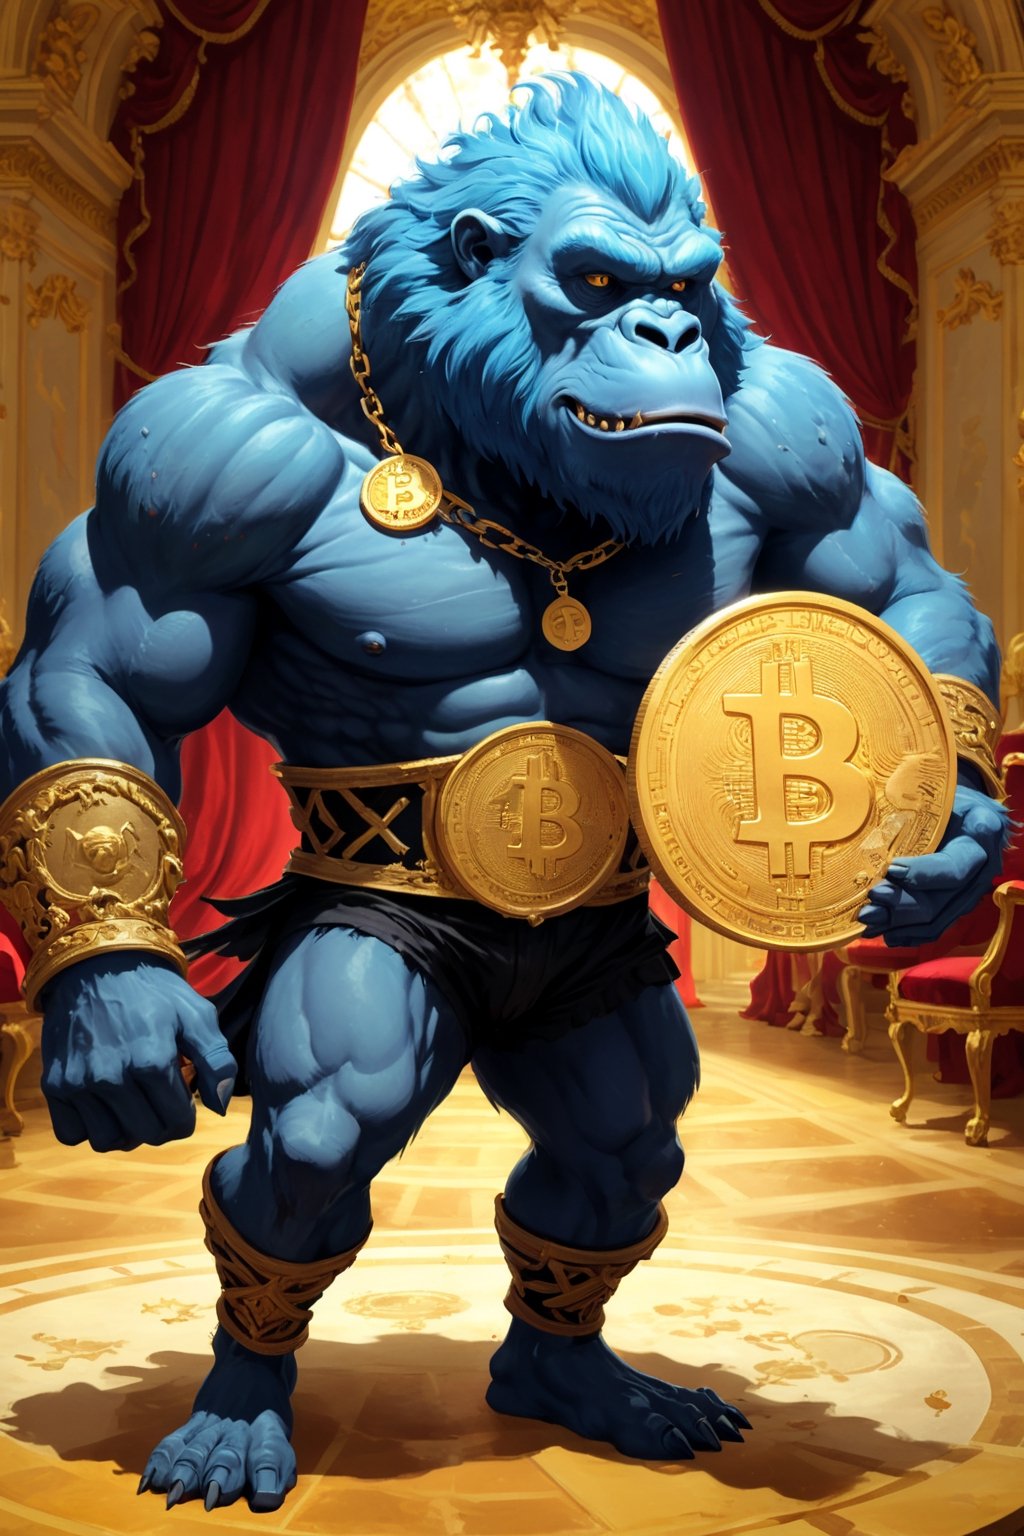 a big bitcoin gorilla cartoon coin plays a grand piano in the Palace of Versailles to the moon and yells at various altcoins, bitcoin badass hero ((xrp, ethereum, cardano) coins sit on the ground and cry, bitcoin disciplines them with a belt, dark and scary, coins on ground are scared and shaking)), (((bitcoin symbol in the background)) print Apex Predator around the edge of the coin), bitcoin symbol on chest, (((Louis XIII theme)))